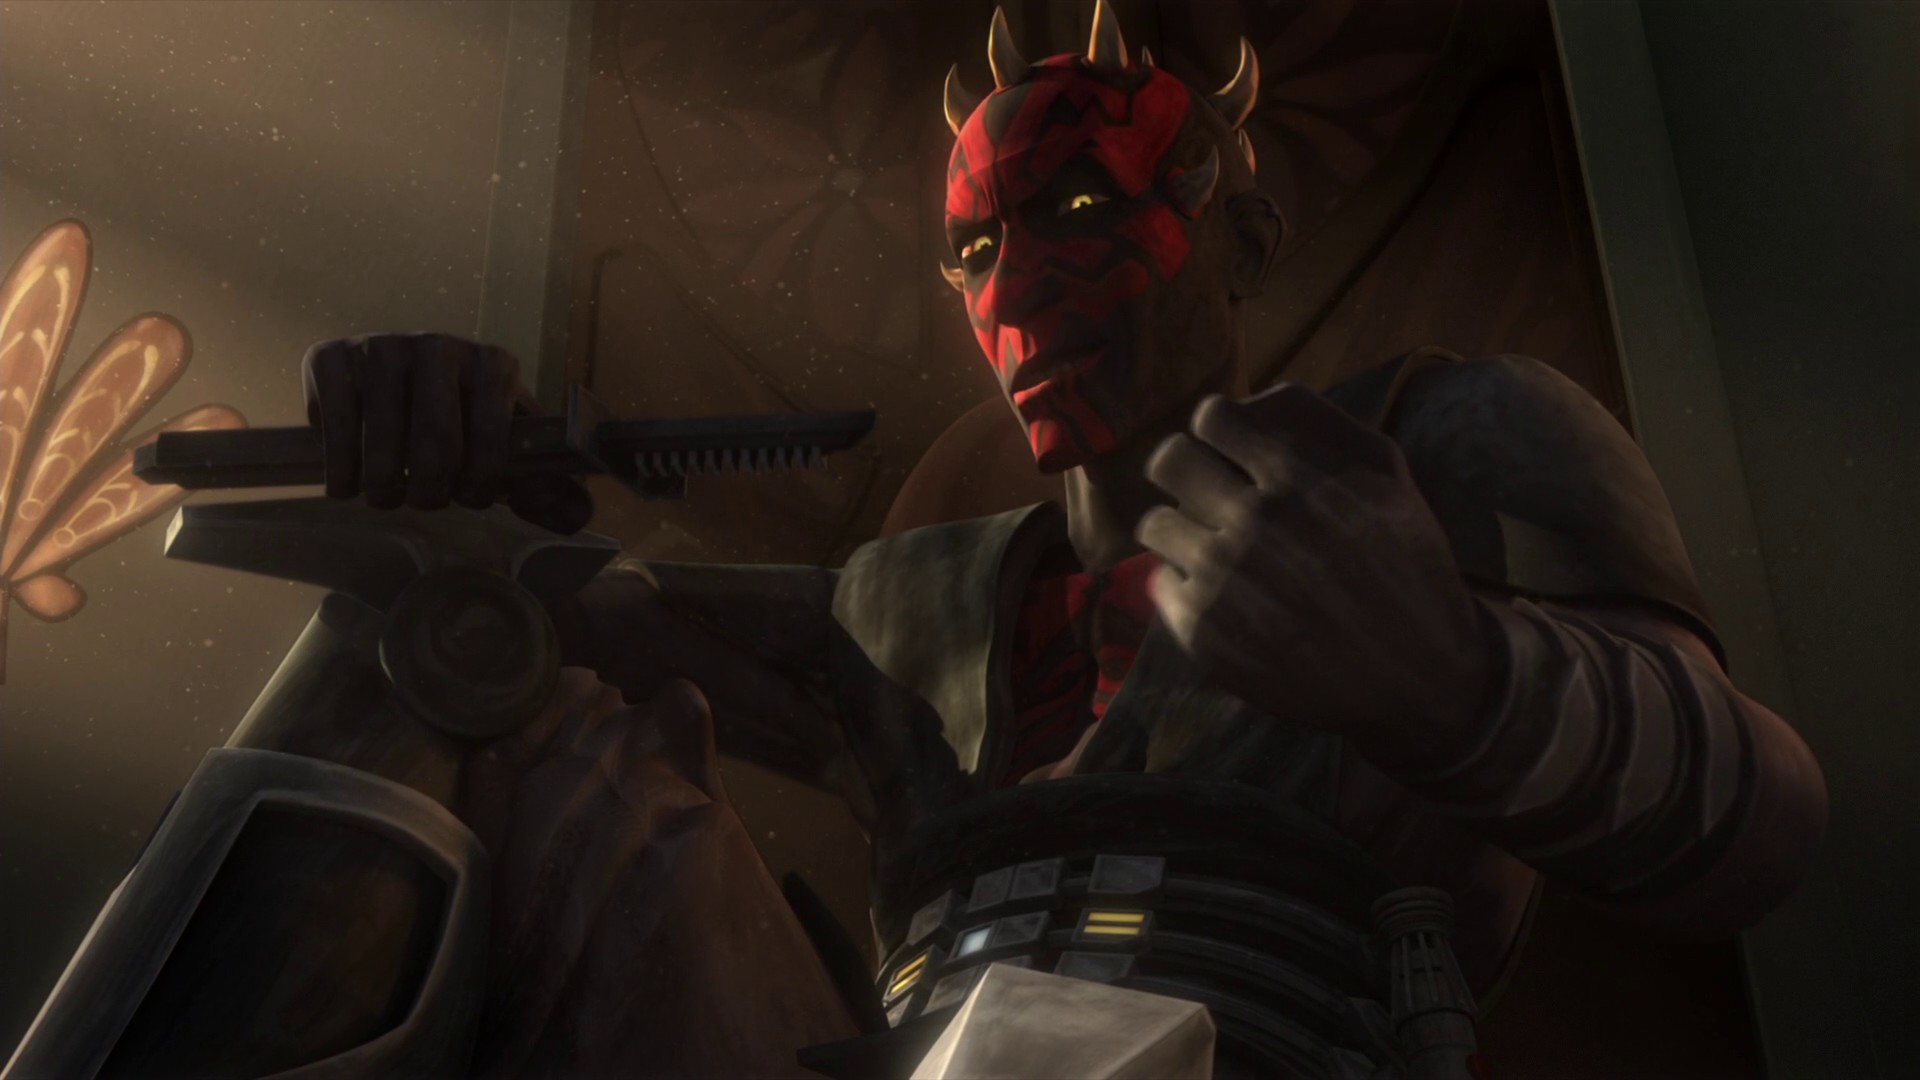 1920x1080 Darth Maul will have the usual force user nerf in these fights  (Choke,Grip,Mind tricks) everything else is fine